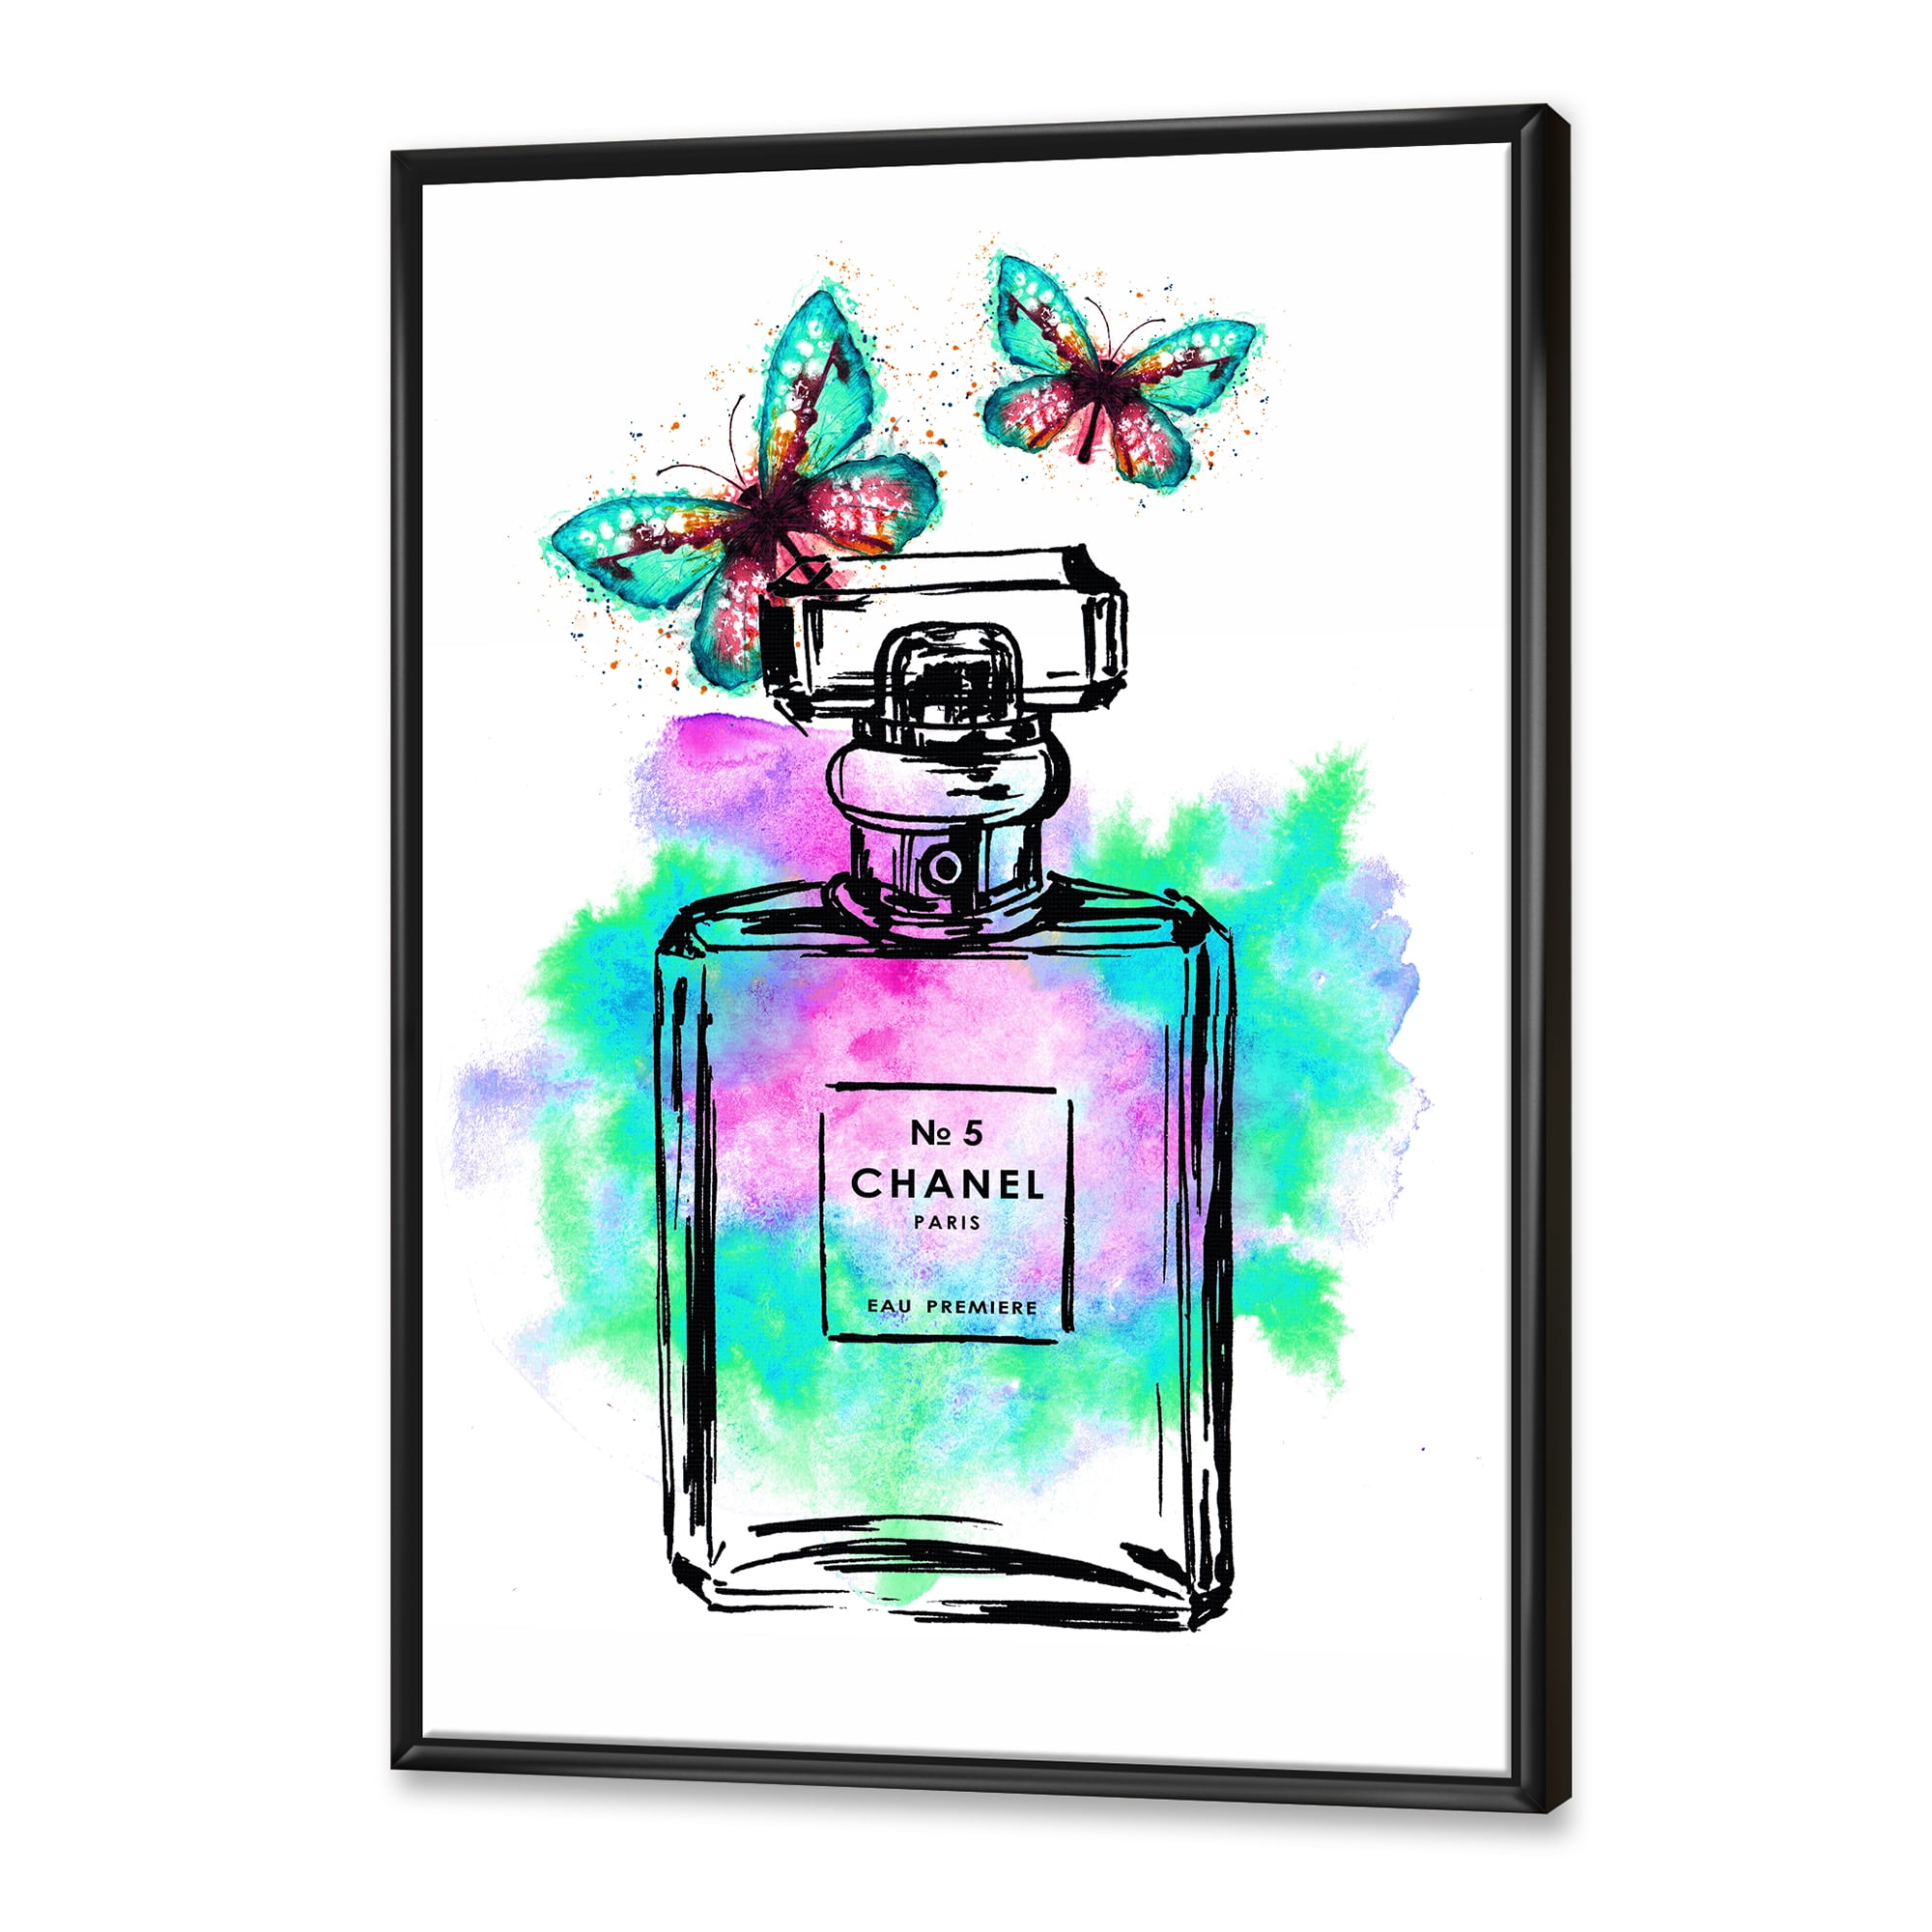 Perfume Chanel Five With 16 in x 32 in Framed Canvas Art Print, by Designart - Walmart.com